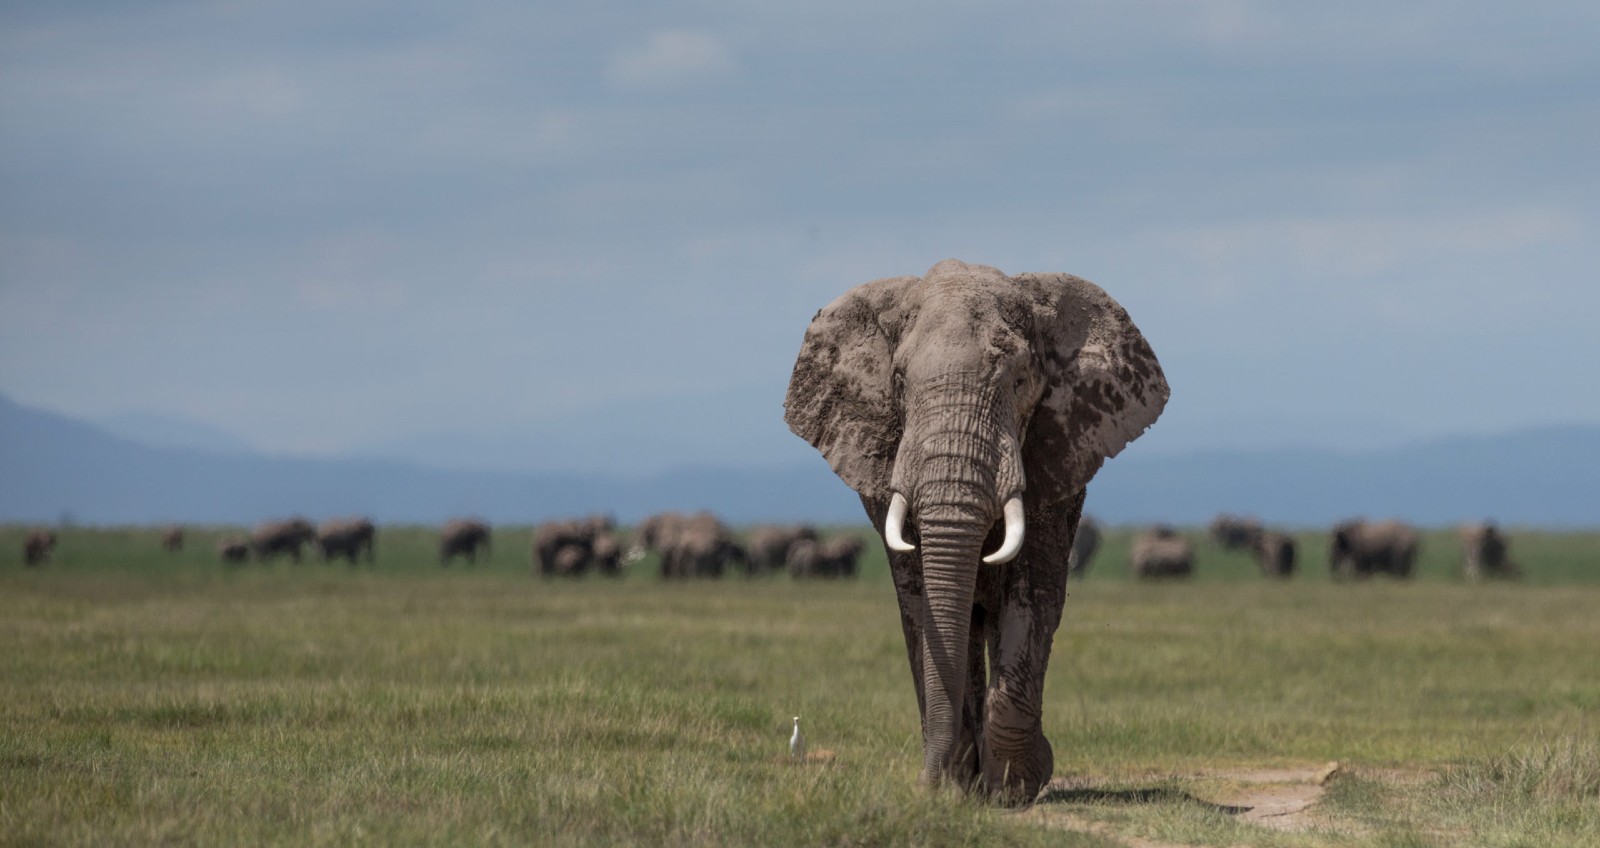 A large elephant with magnificent tusks walks across the African plain